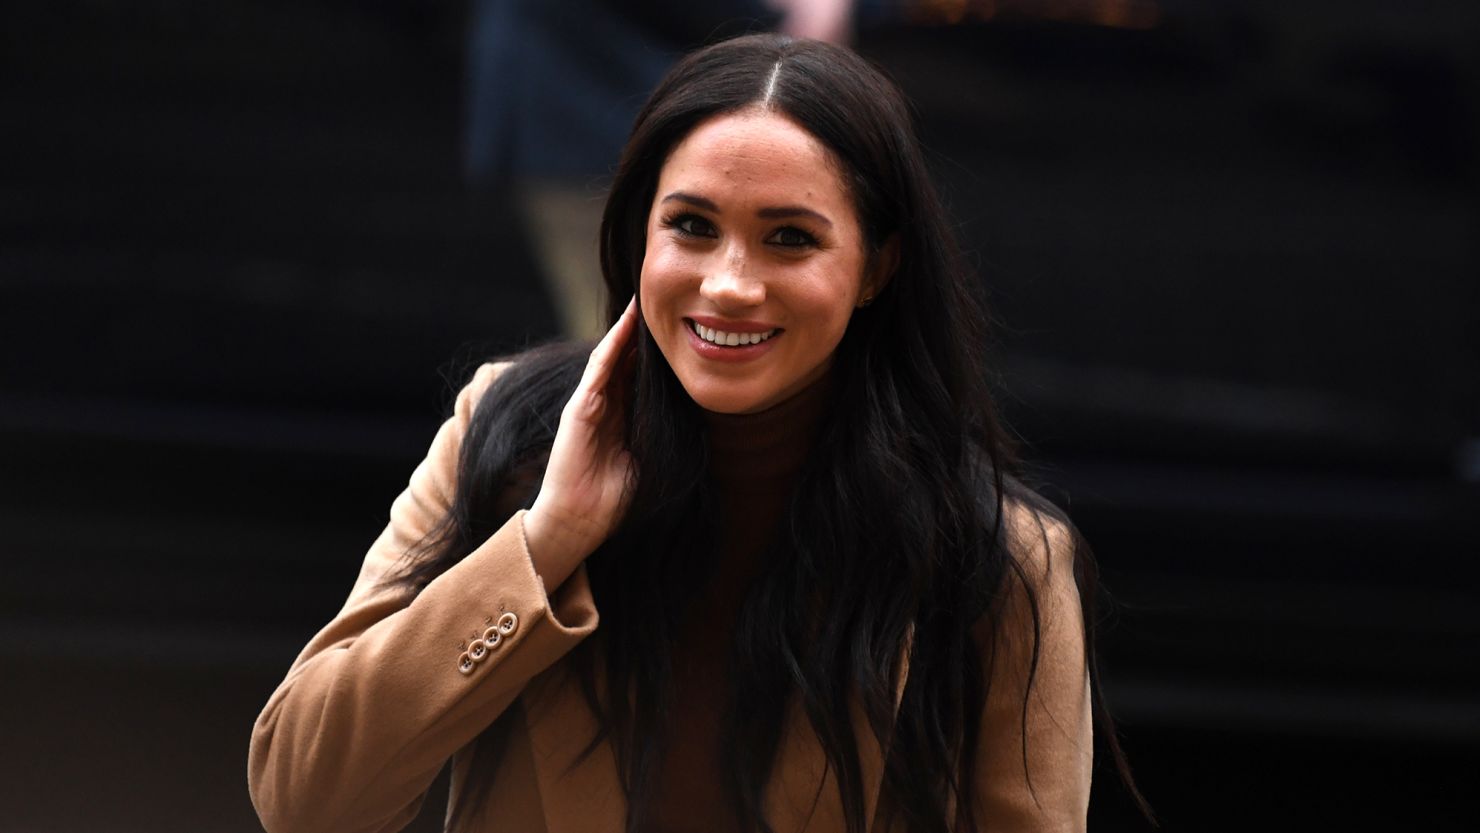 Meghan, Duchess of Sussex, has won a privacy claim in her case against a tabloid newspaper.